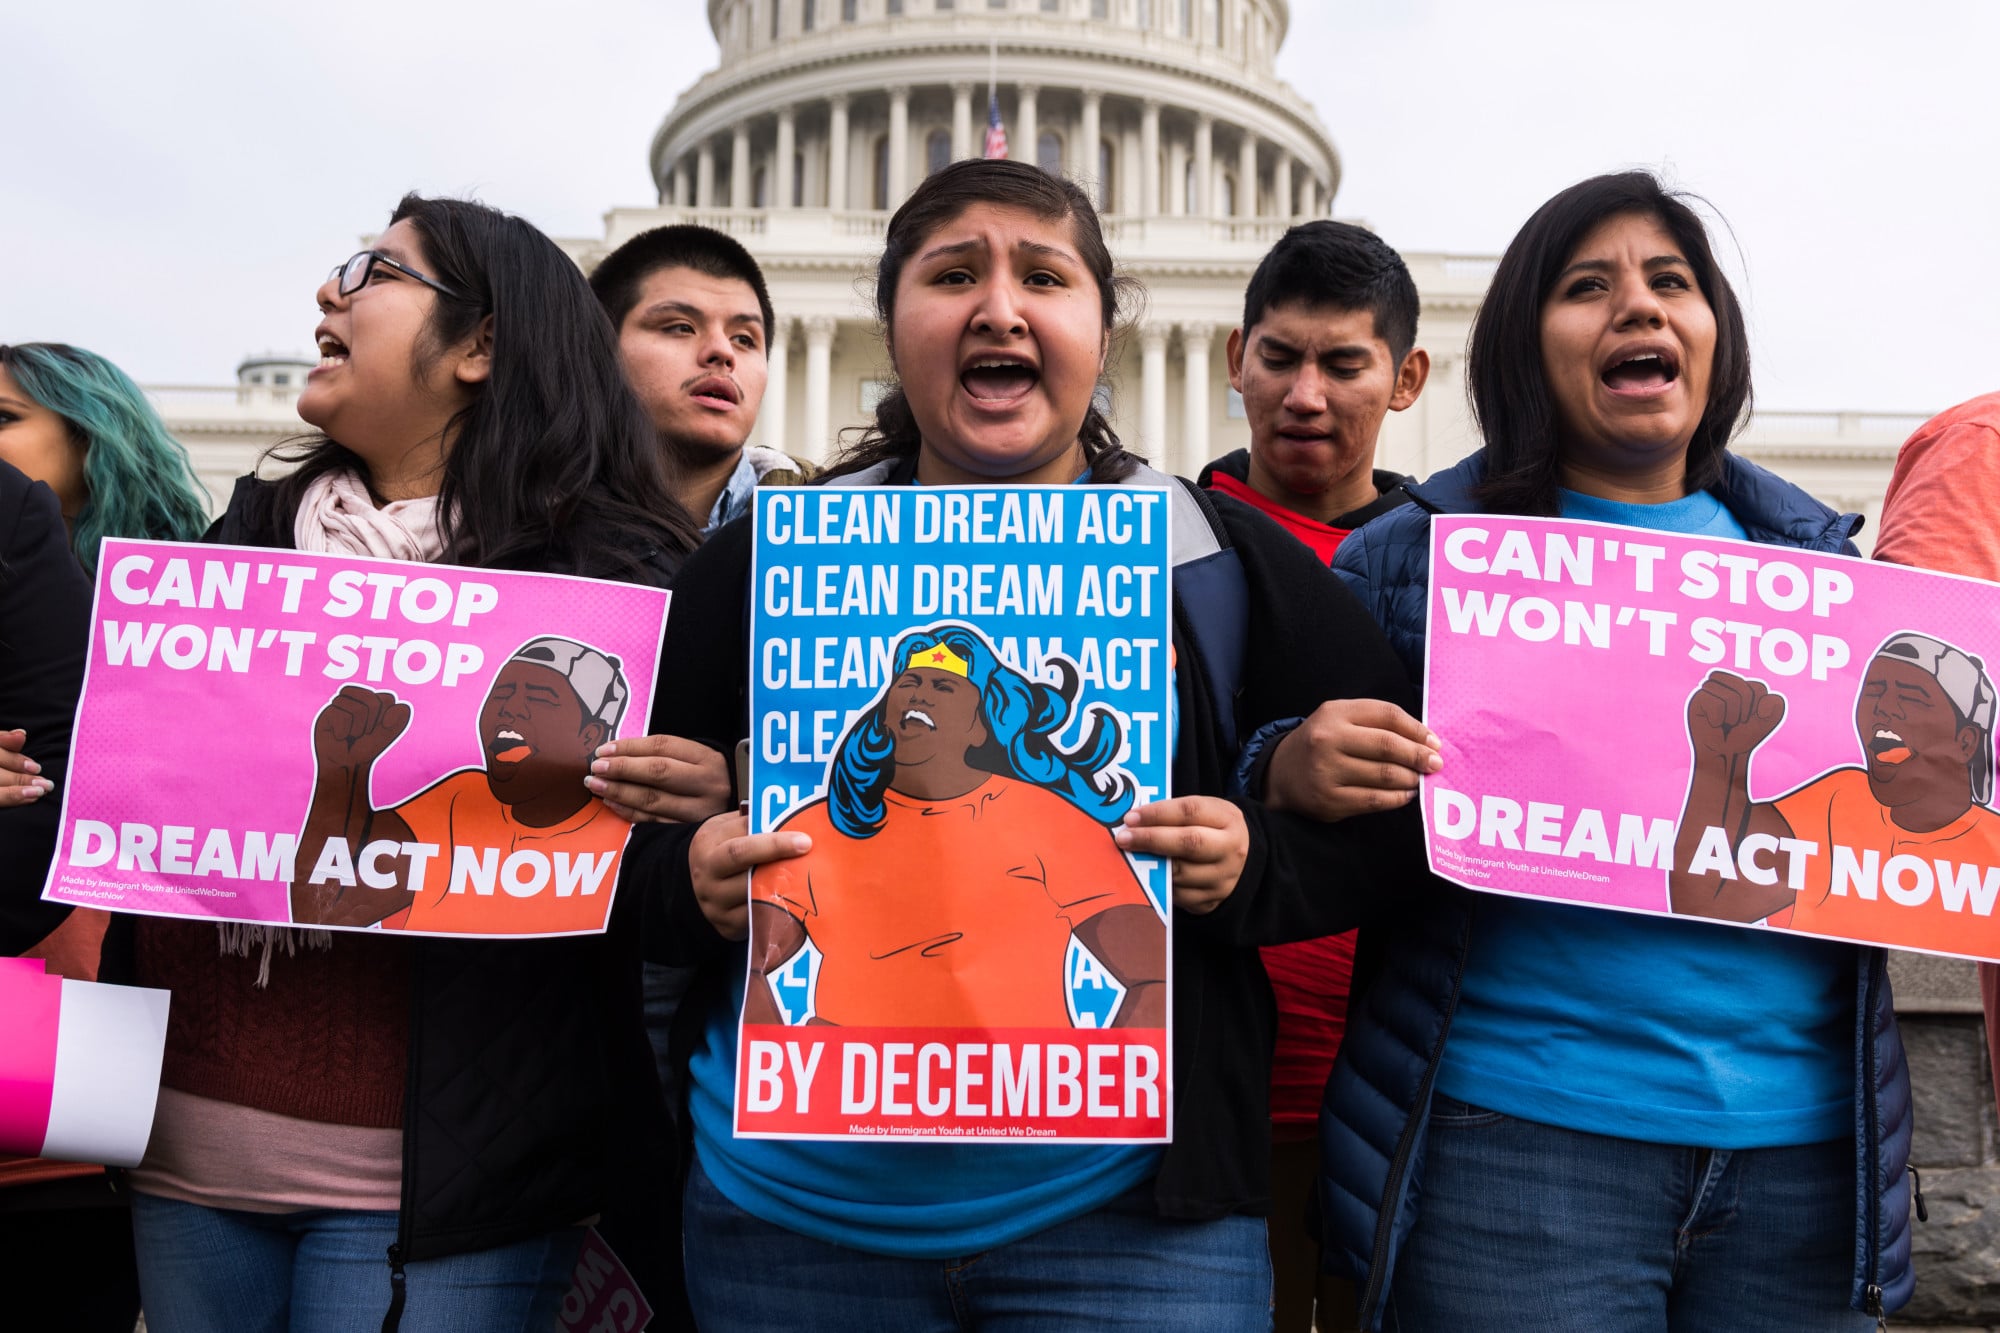 Environmentalist statement of solidarity with the Dreamers